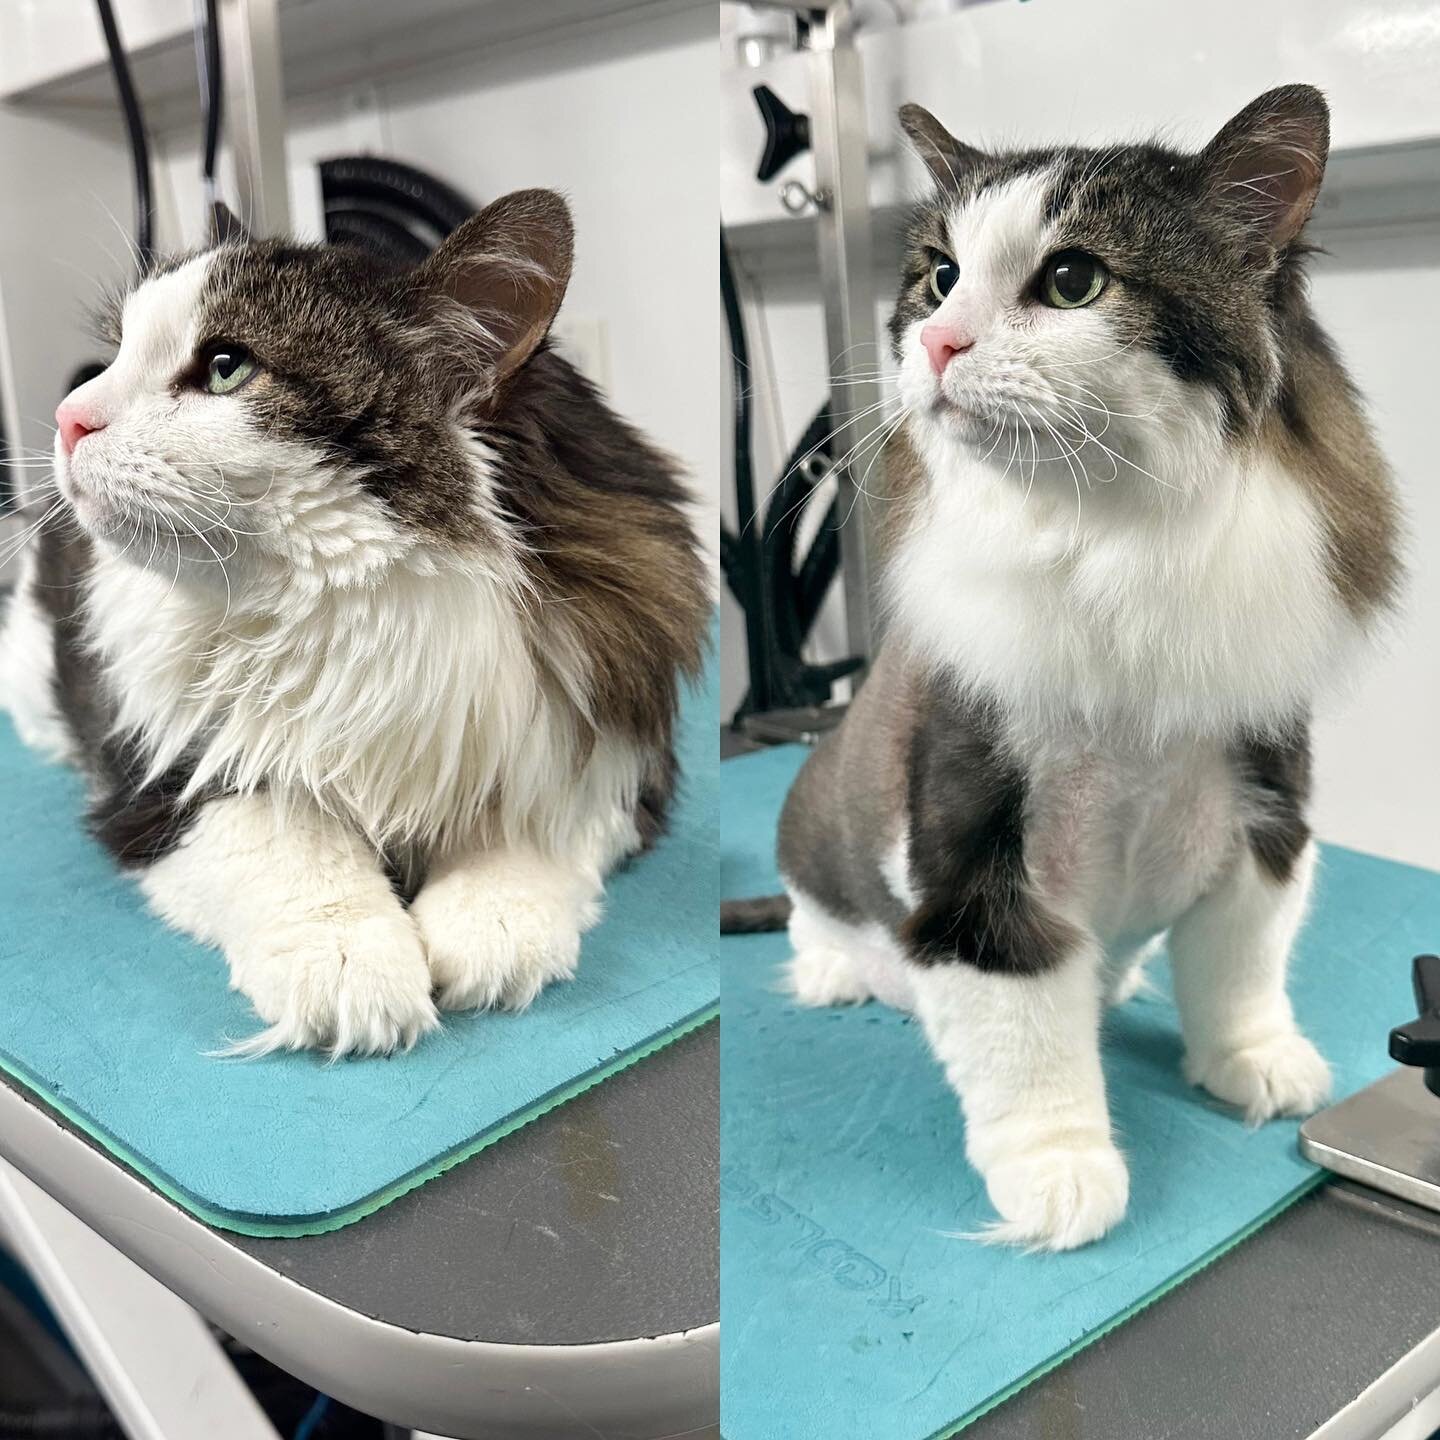 Before and after, Birdie edition! The most popular misconception about cats is that they groom themselves. Birdie would like you to know that she prefers a good bath and shave over licking her self all over 😹